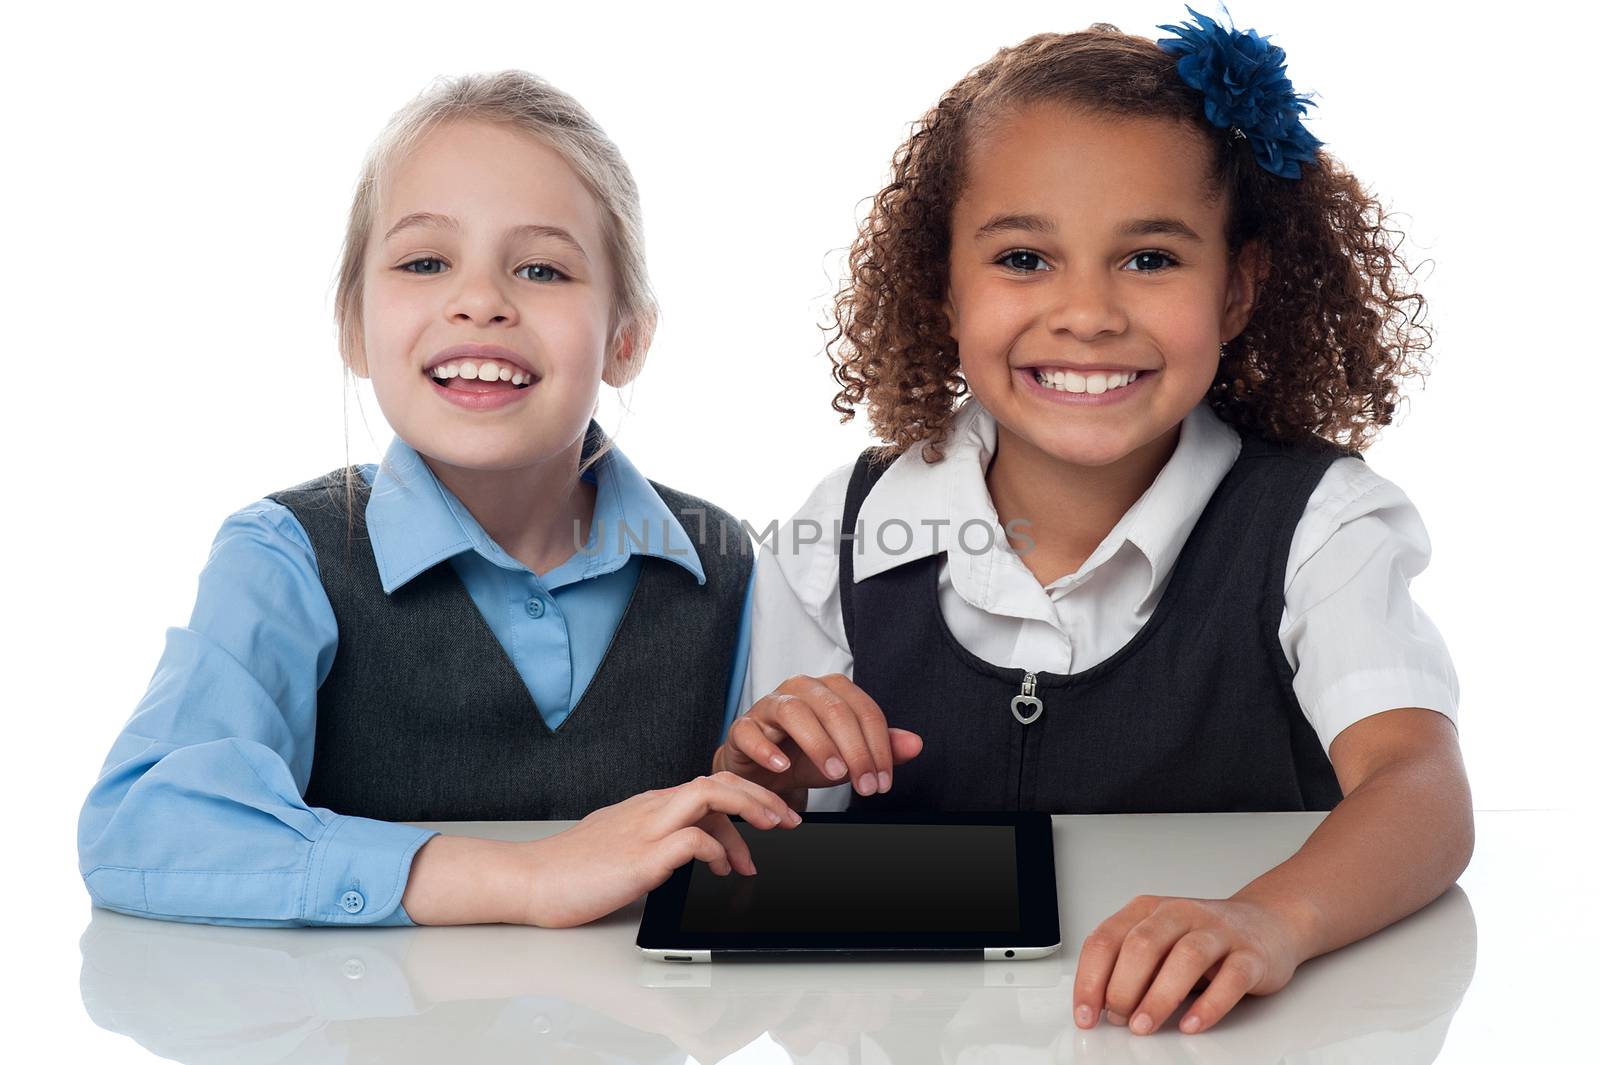 Children are using tablet while sitting at table